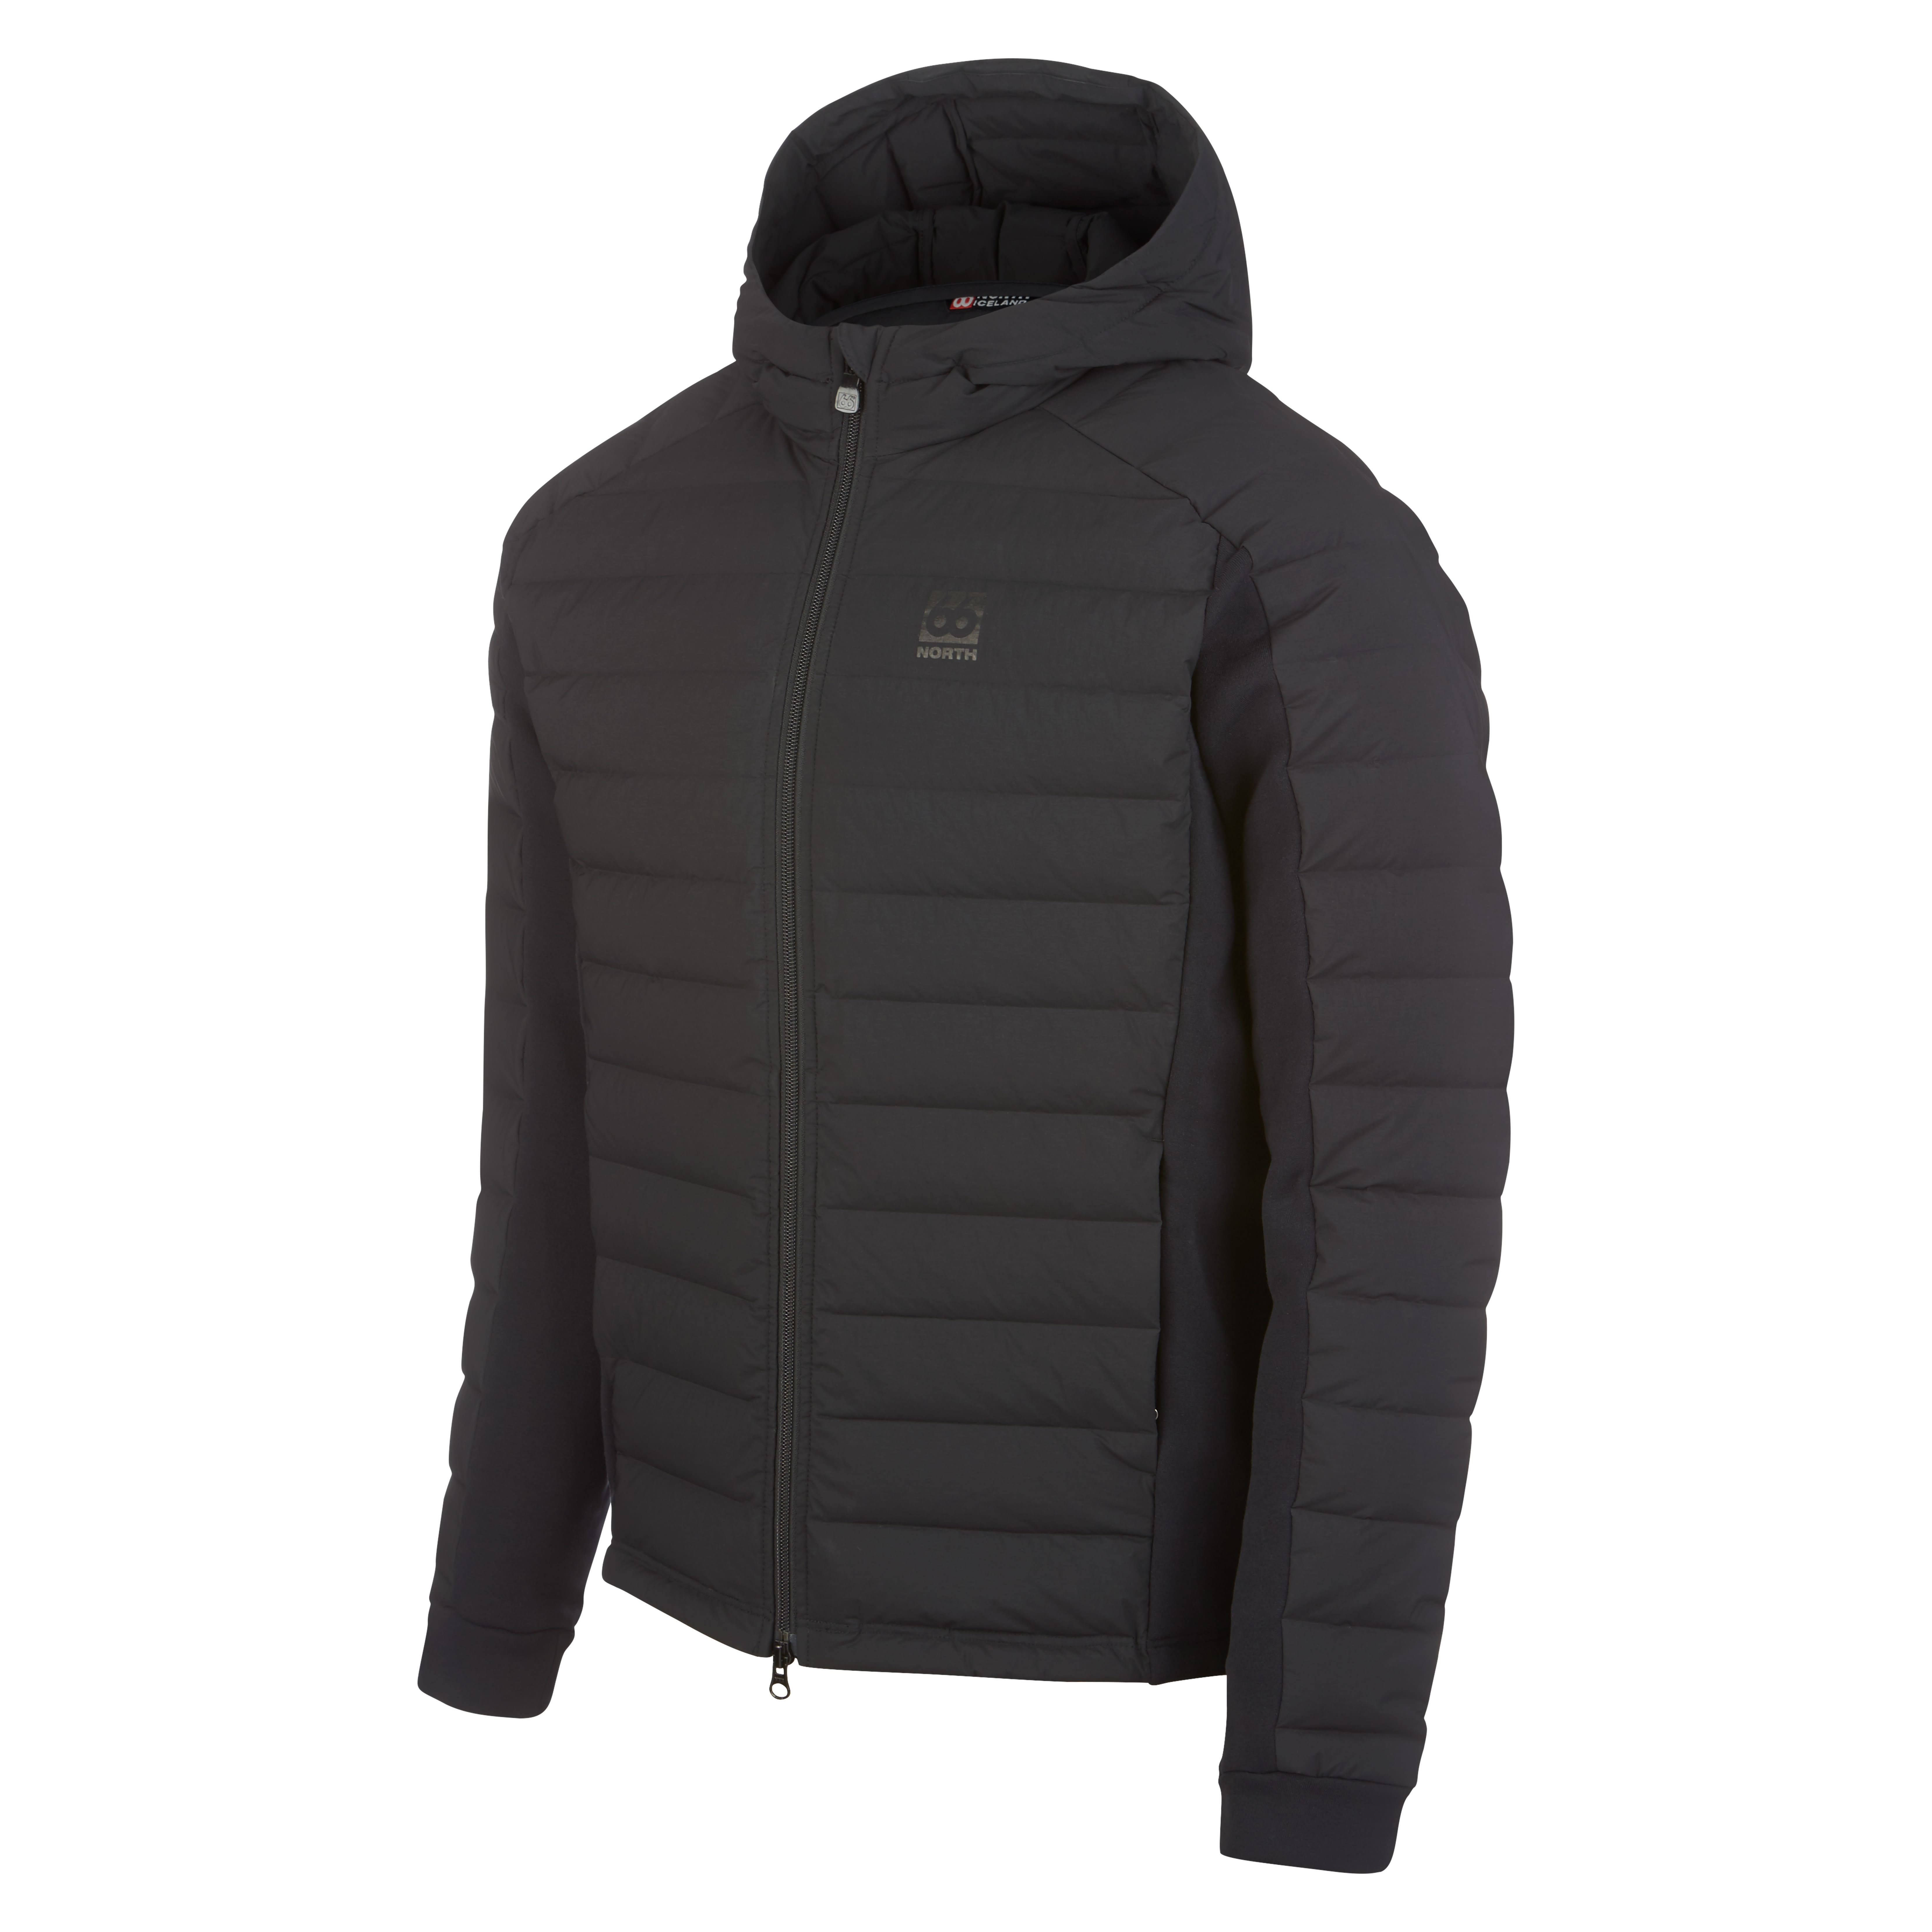 Buy 66 North Men's Ok Jacket from Outnorth